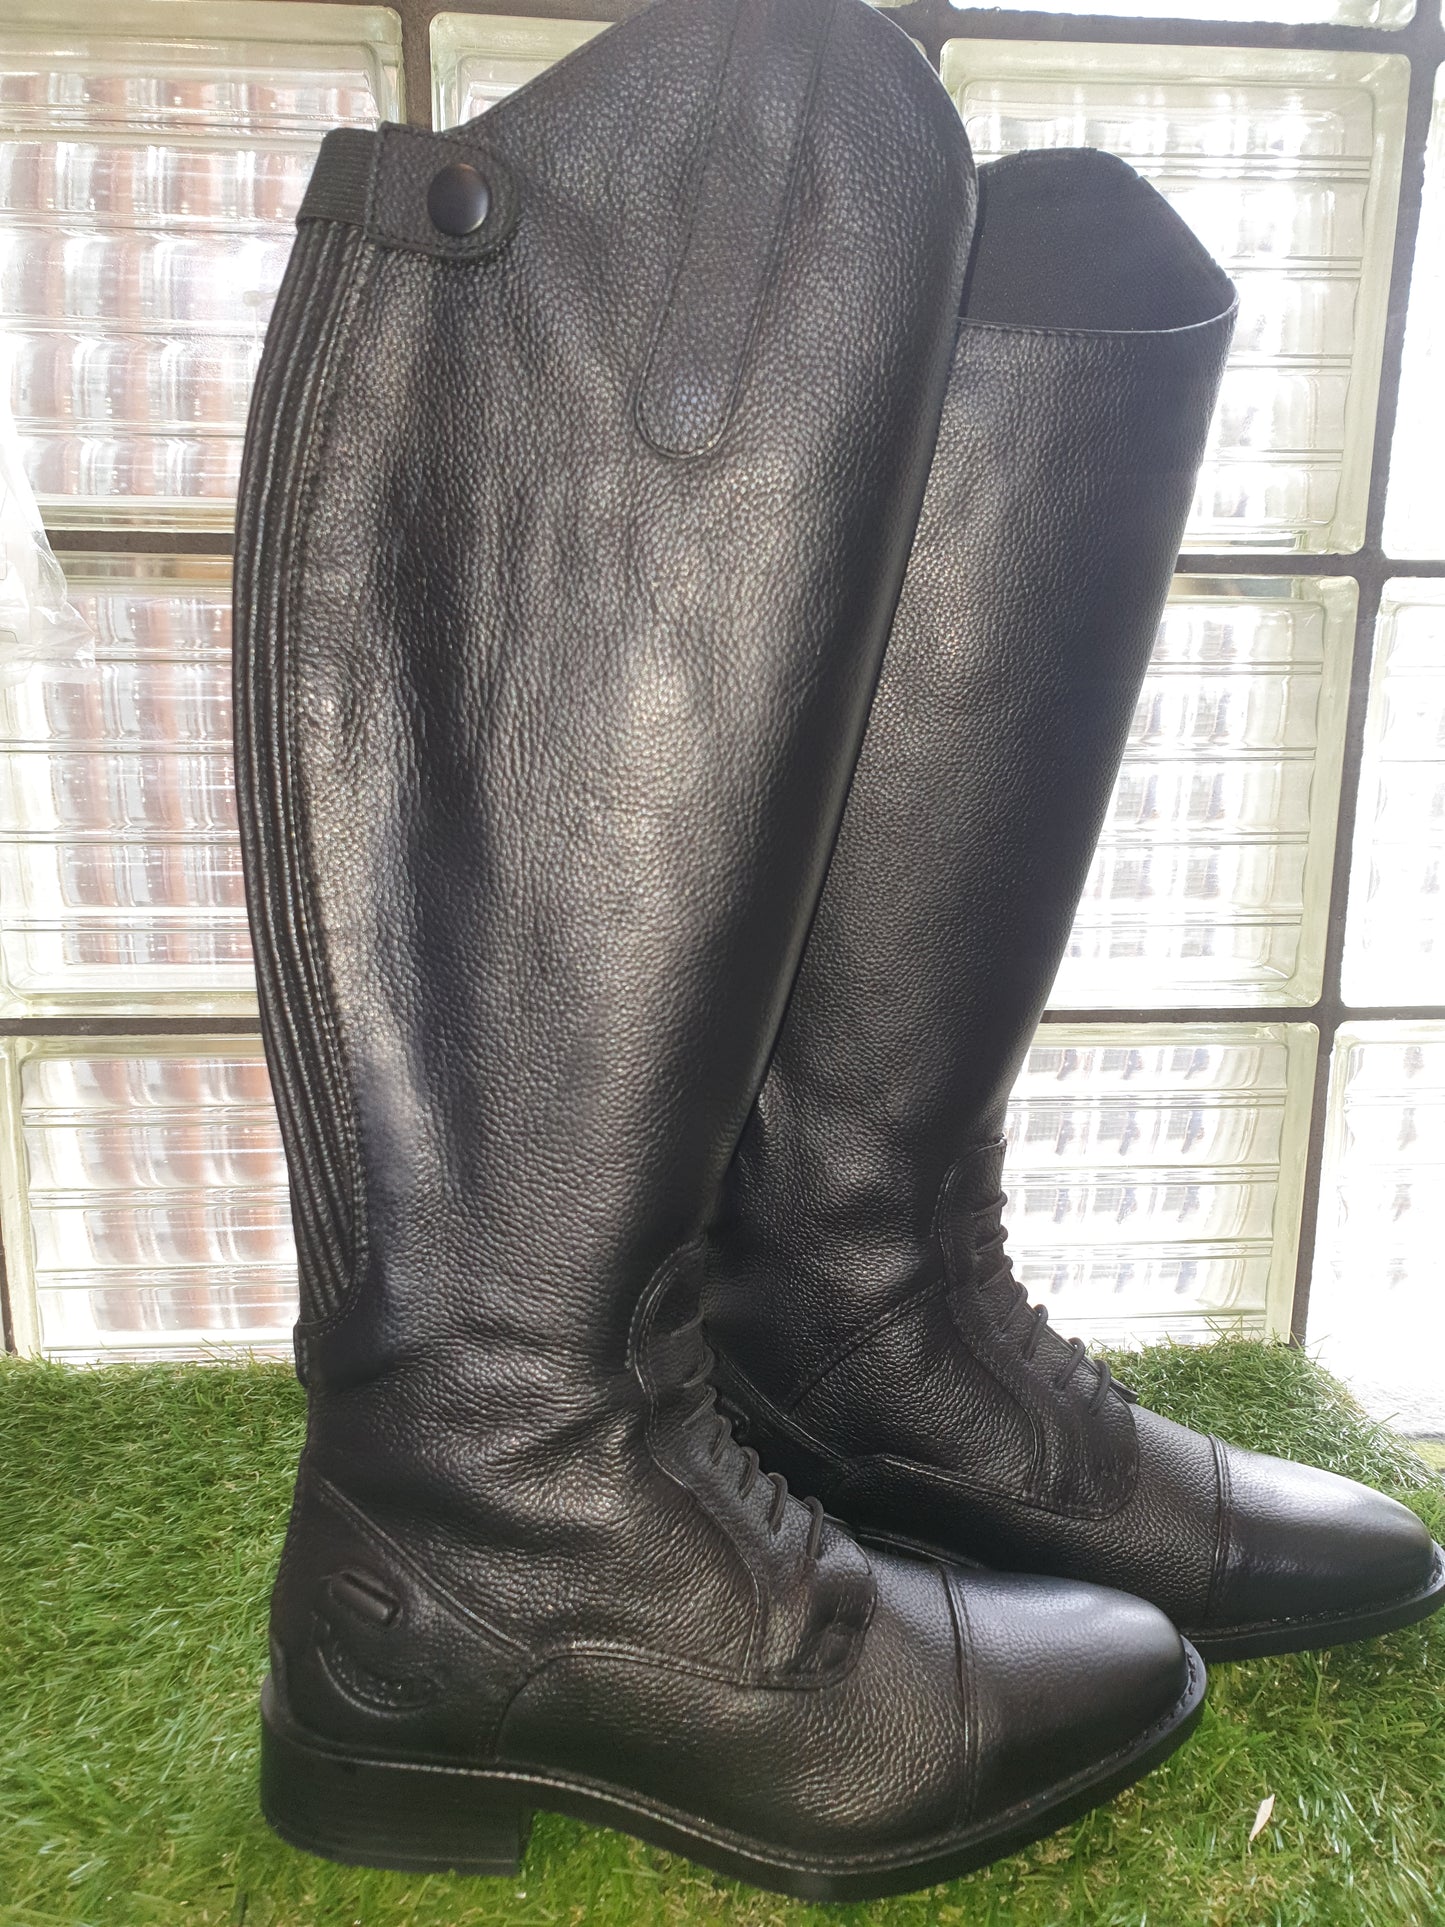 NEW Rhinegold size 4 Black Extra Wide leather Riding boots FREE POSTAGE 🟣